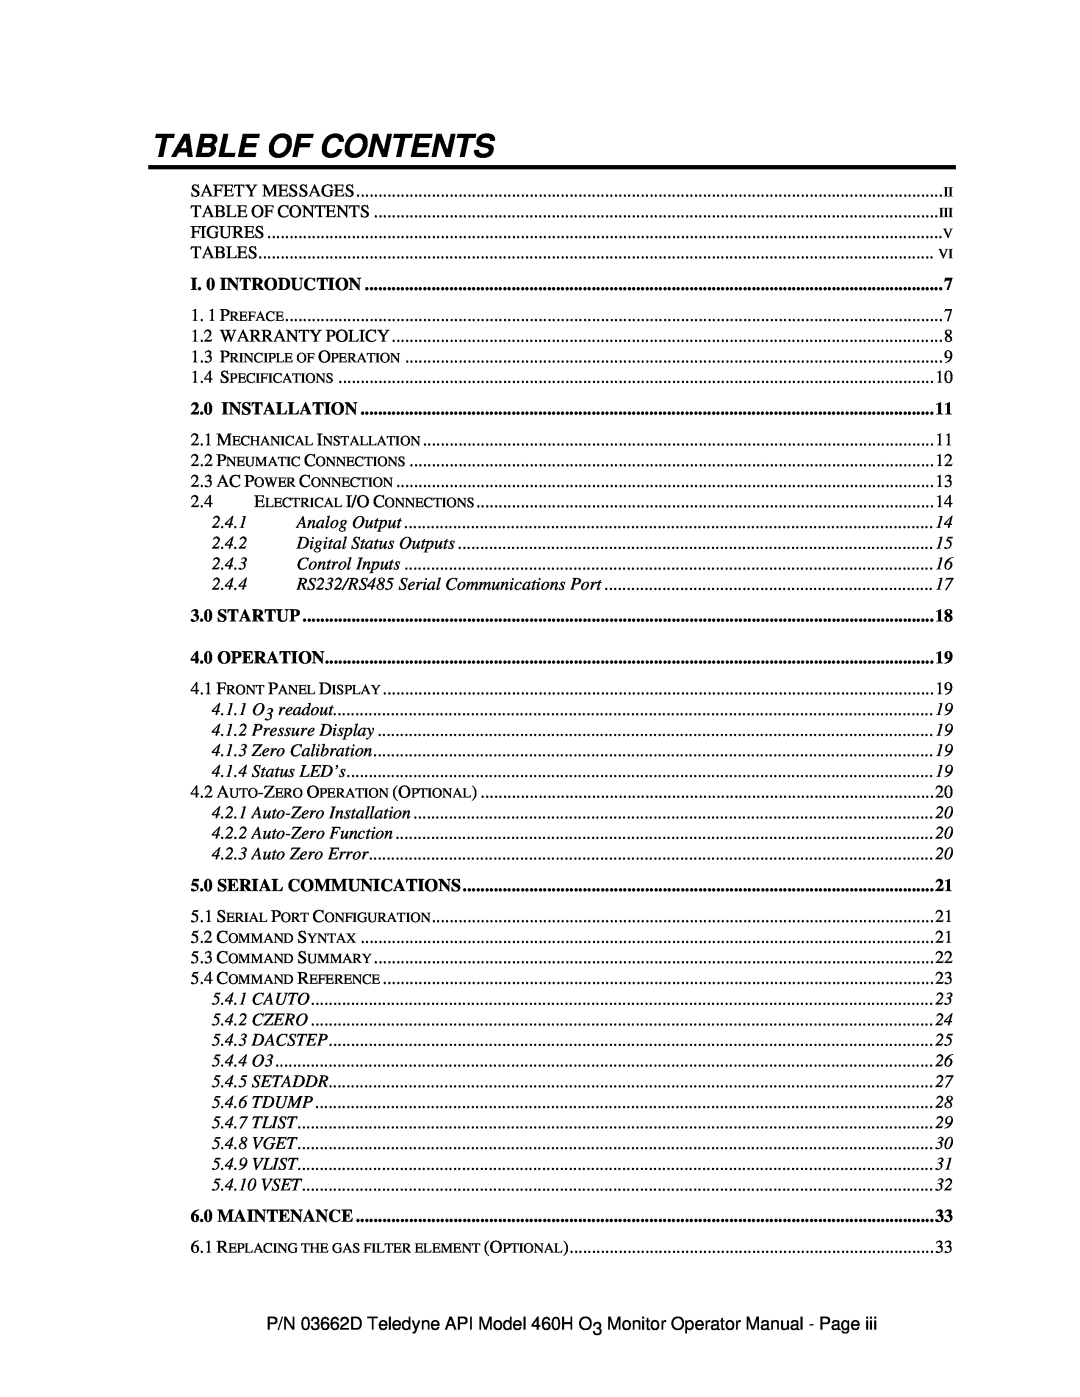 Teledyne 460H Table Of Contents, I. 0 INTRODUCTION, Installation, Startup, Operation, Serial Communications, Maintenance 